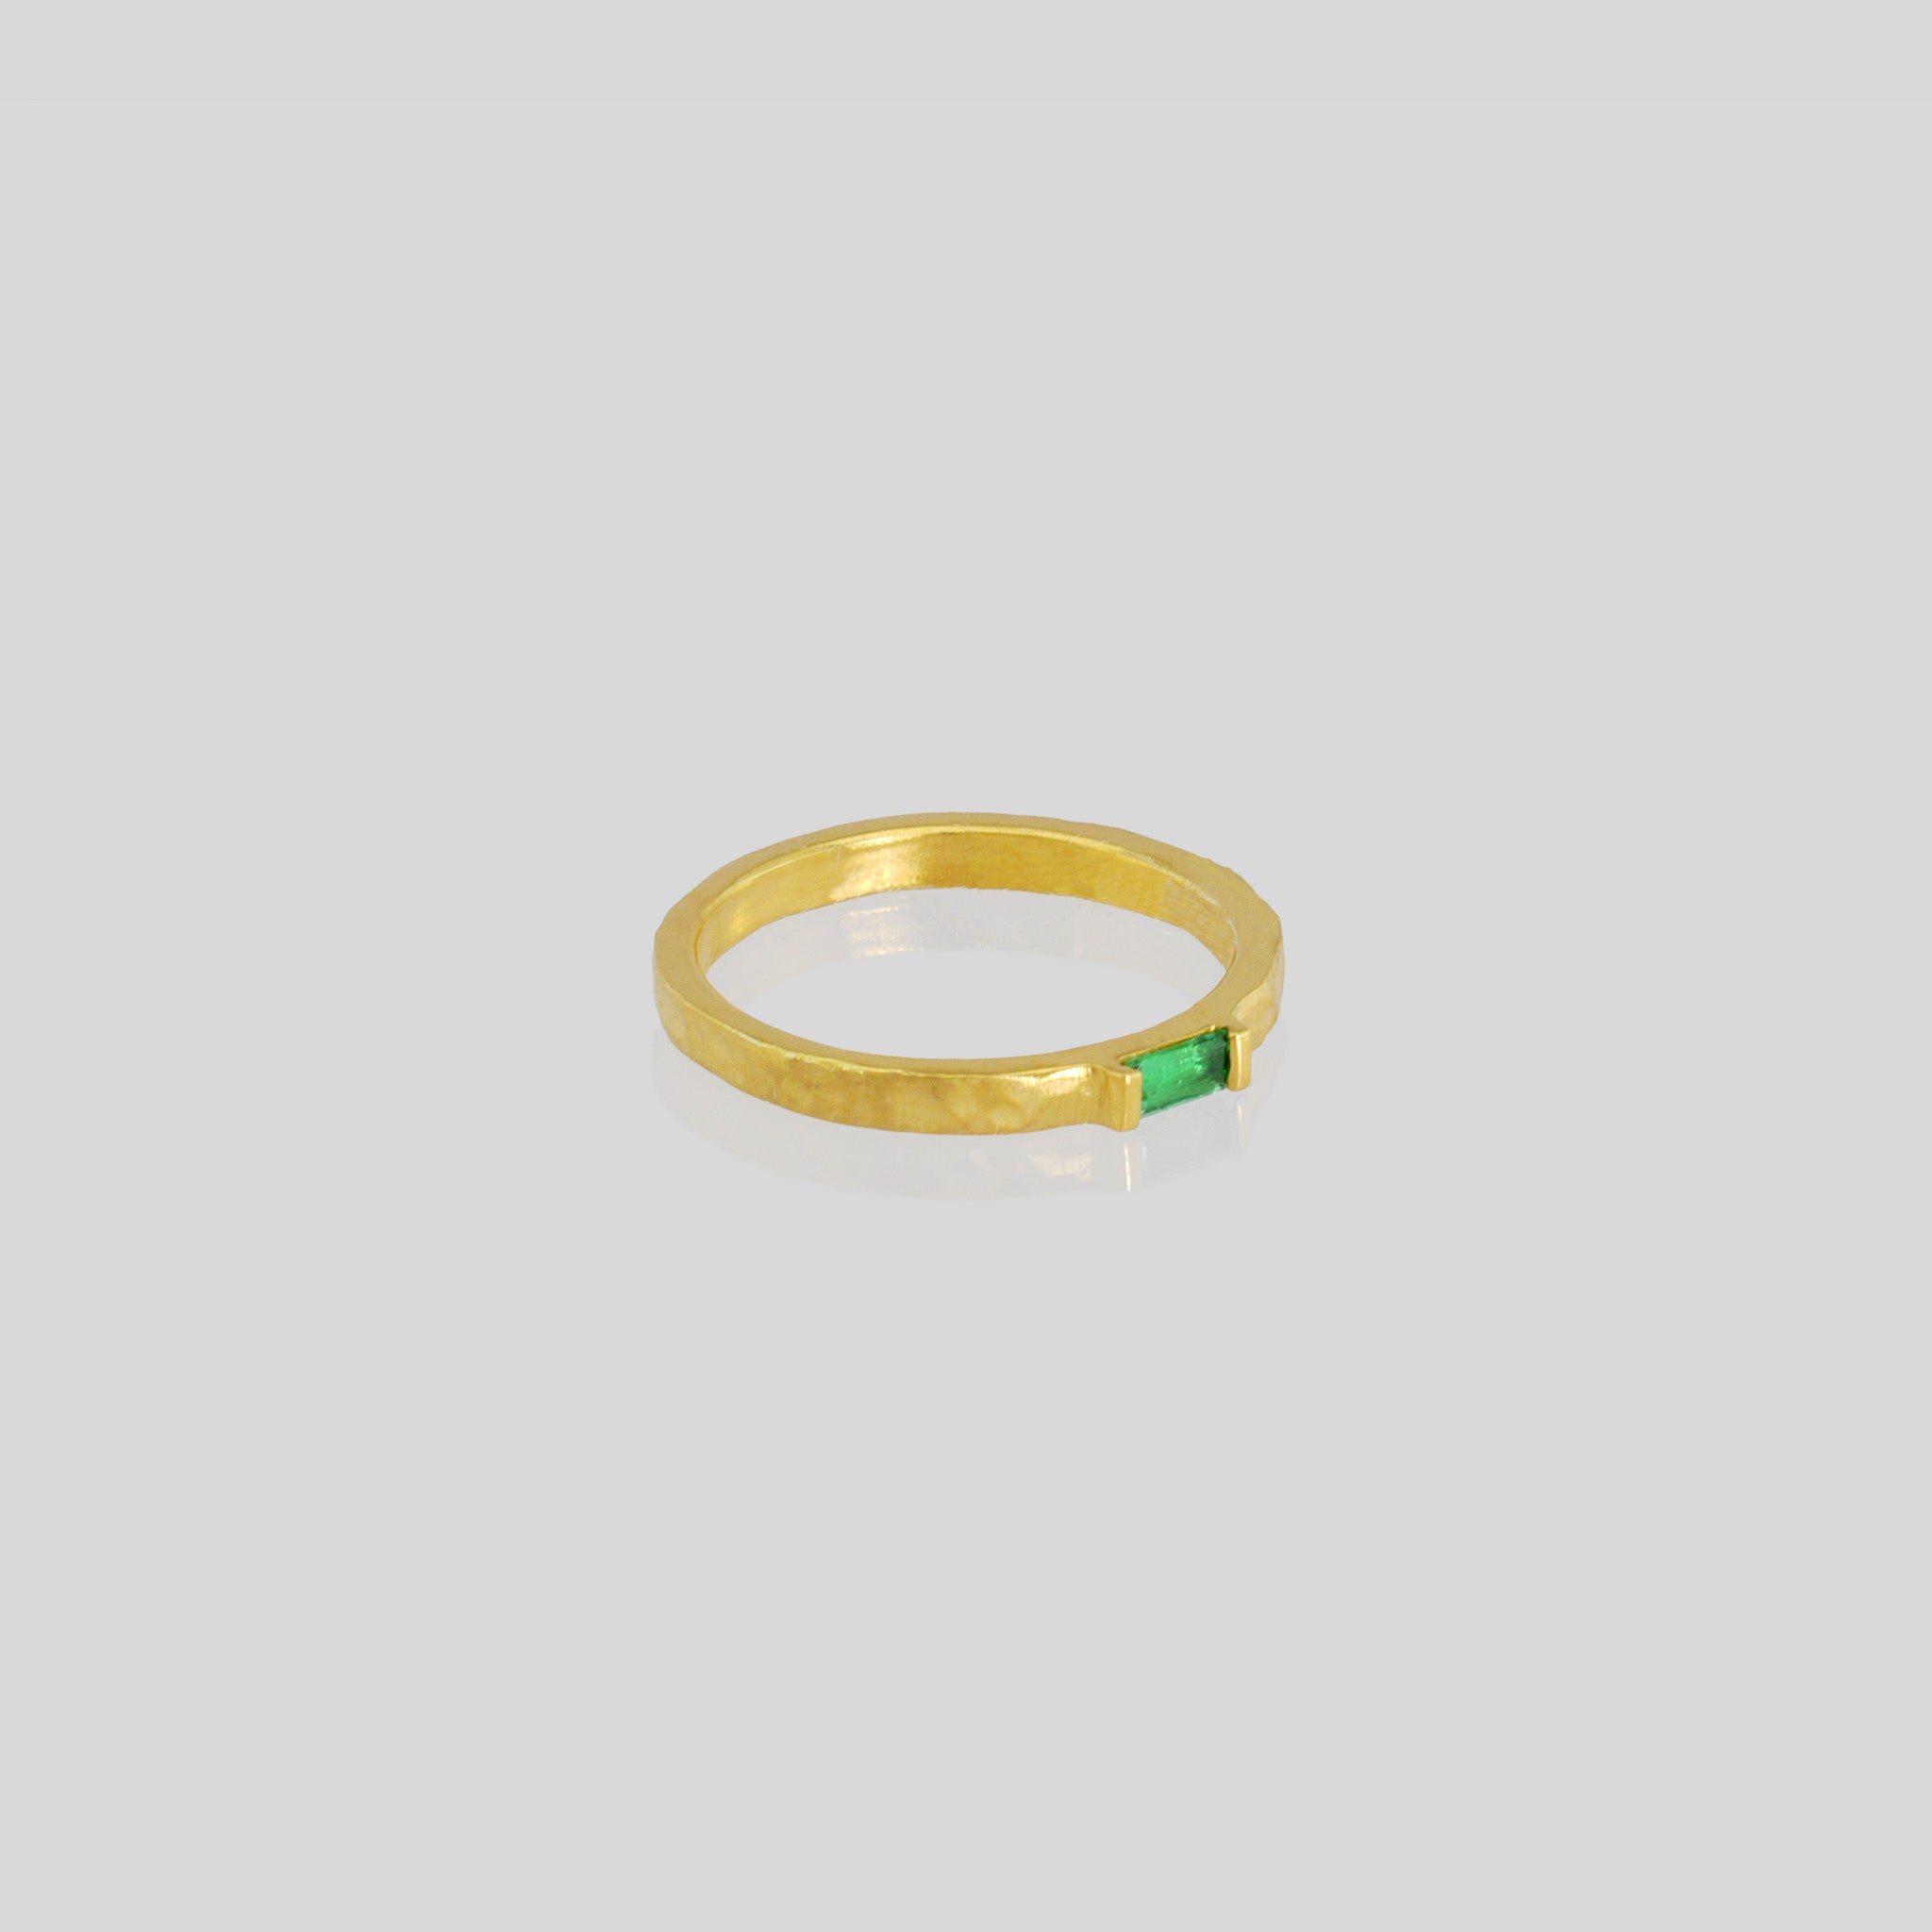 Handmade gold ring with hand-hammered surface and baguette Emerald accent. Timeless elegance in Yellow gold, a perfect addition to any ensemble.